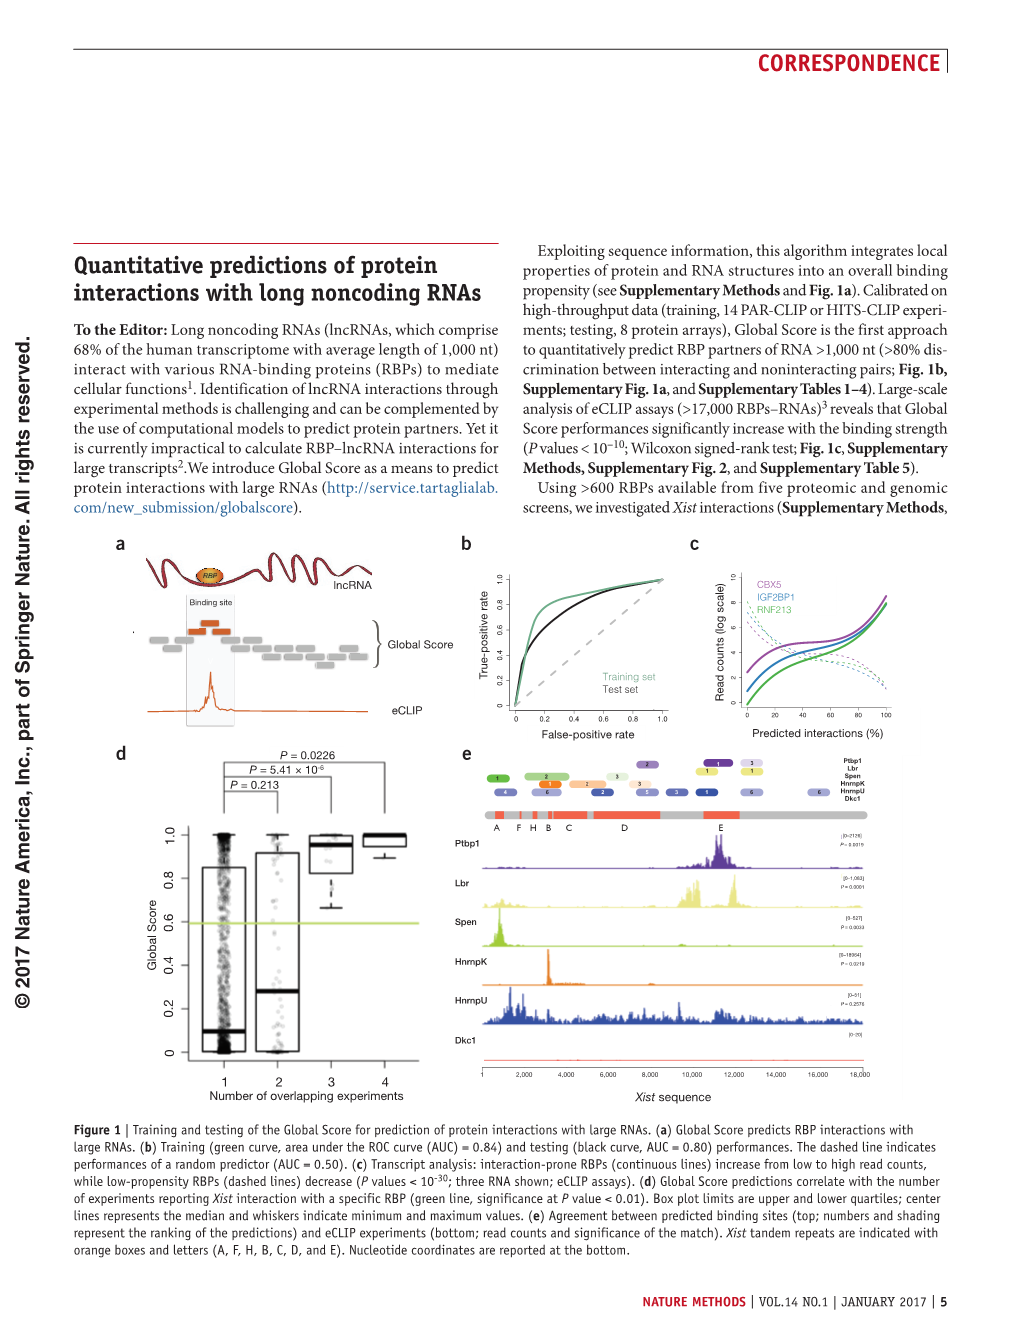 Quantitative Predictions of Protein Interactions with Long Noncoding